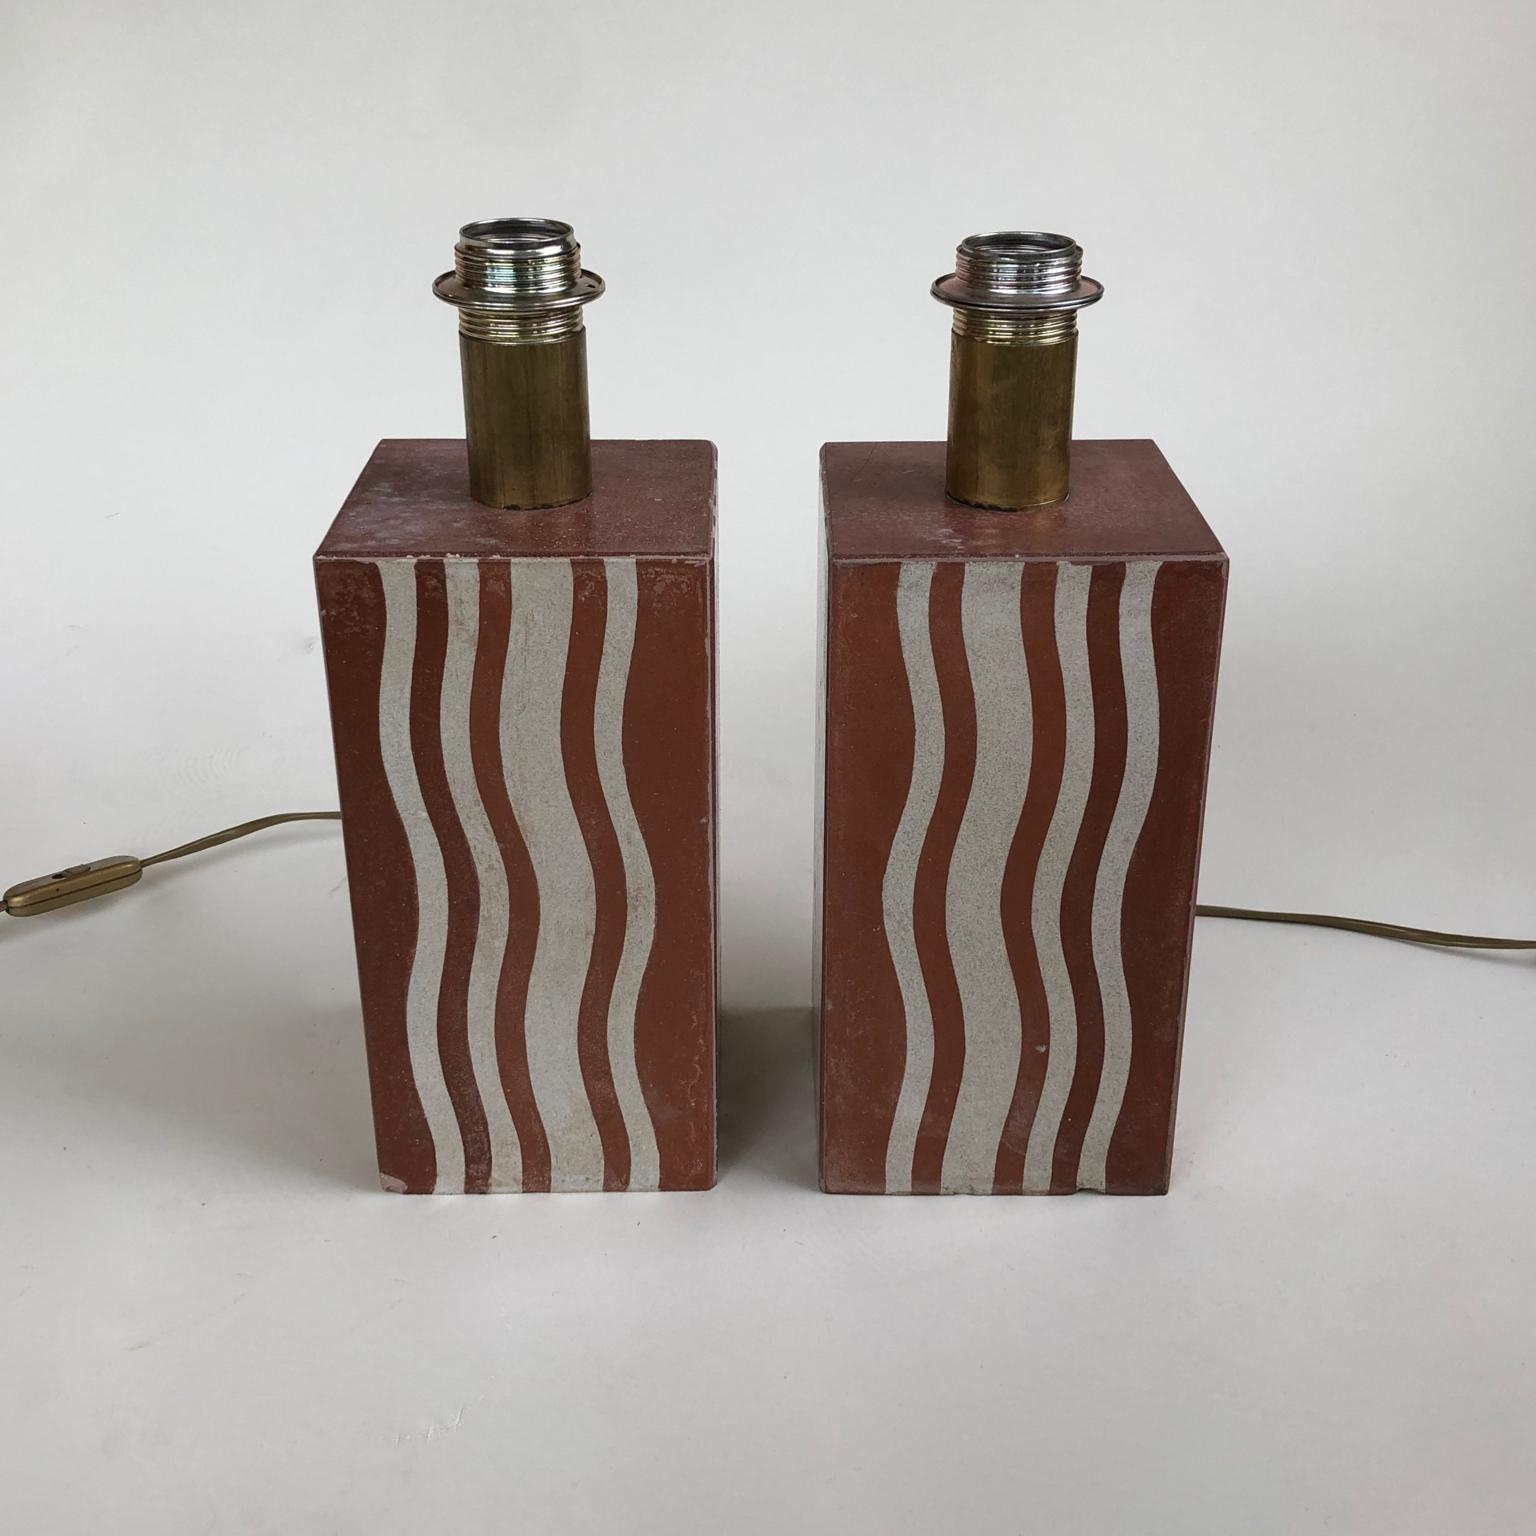 Sold as a pair - 2 desk / table lamps finished with interesting 1930s Reclaimed Art Deco terracotta panels or tiles. These original earthenware tiles or panels are quite unusual with a streamlined Postmodern looking design mixed with lovely earthy